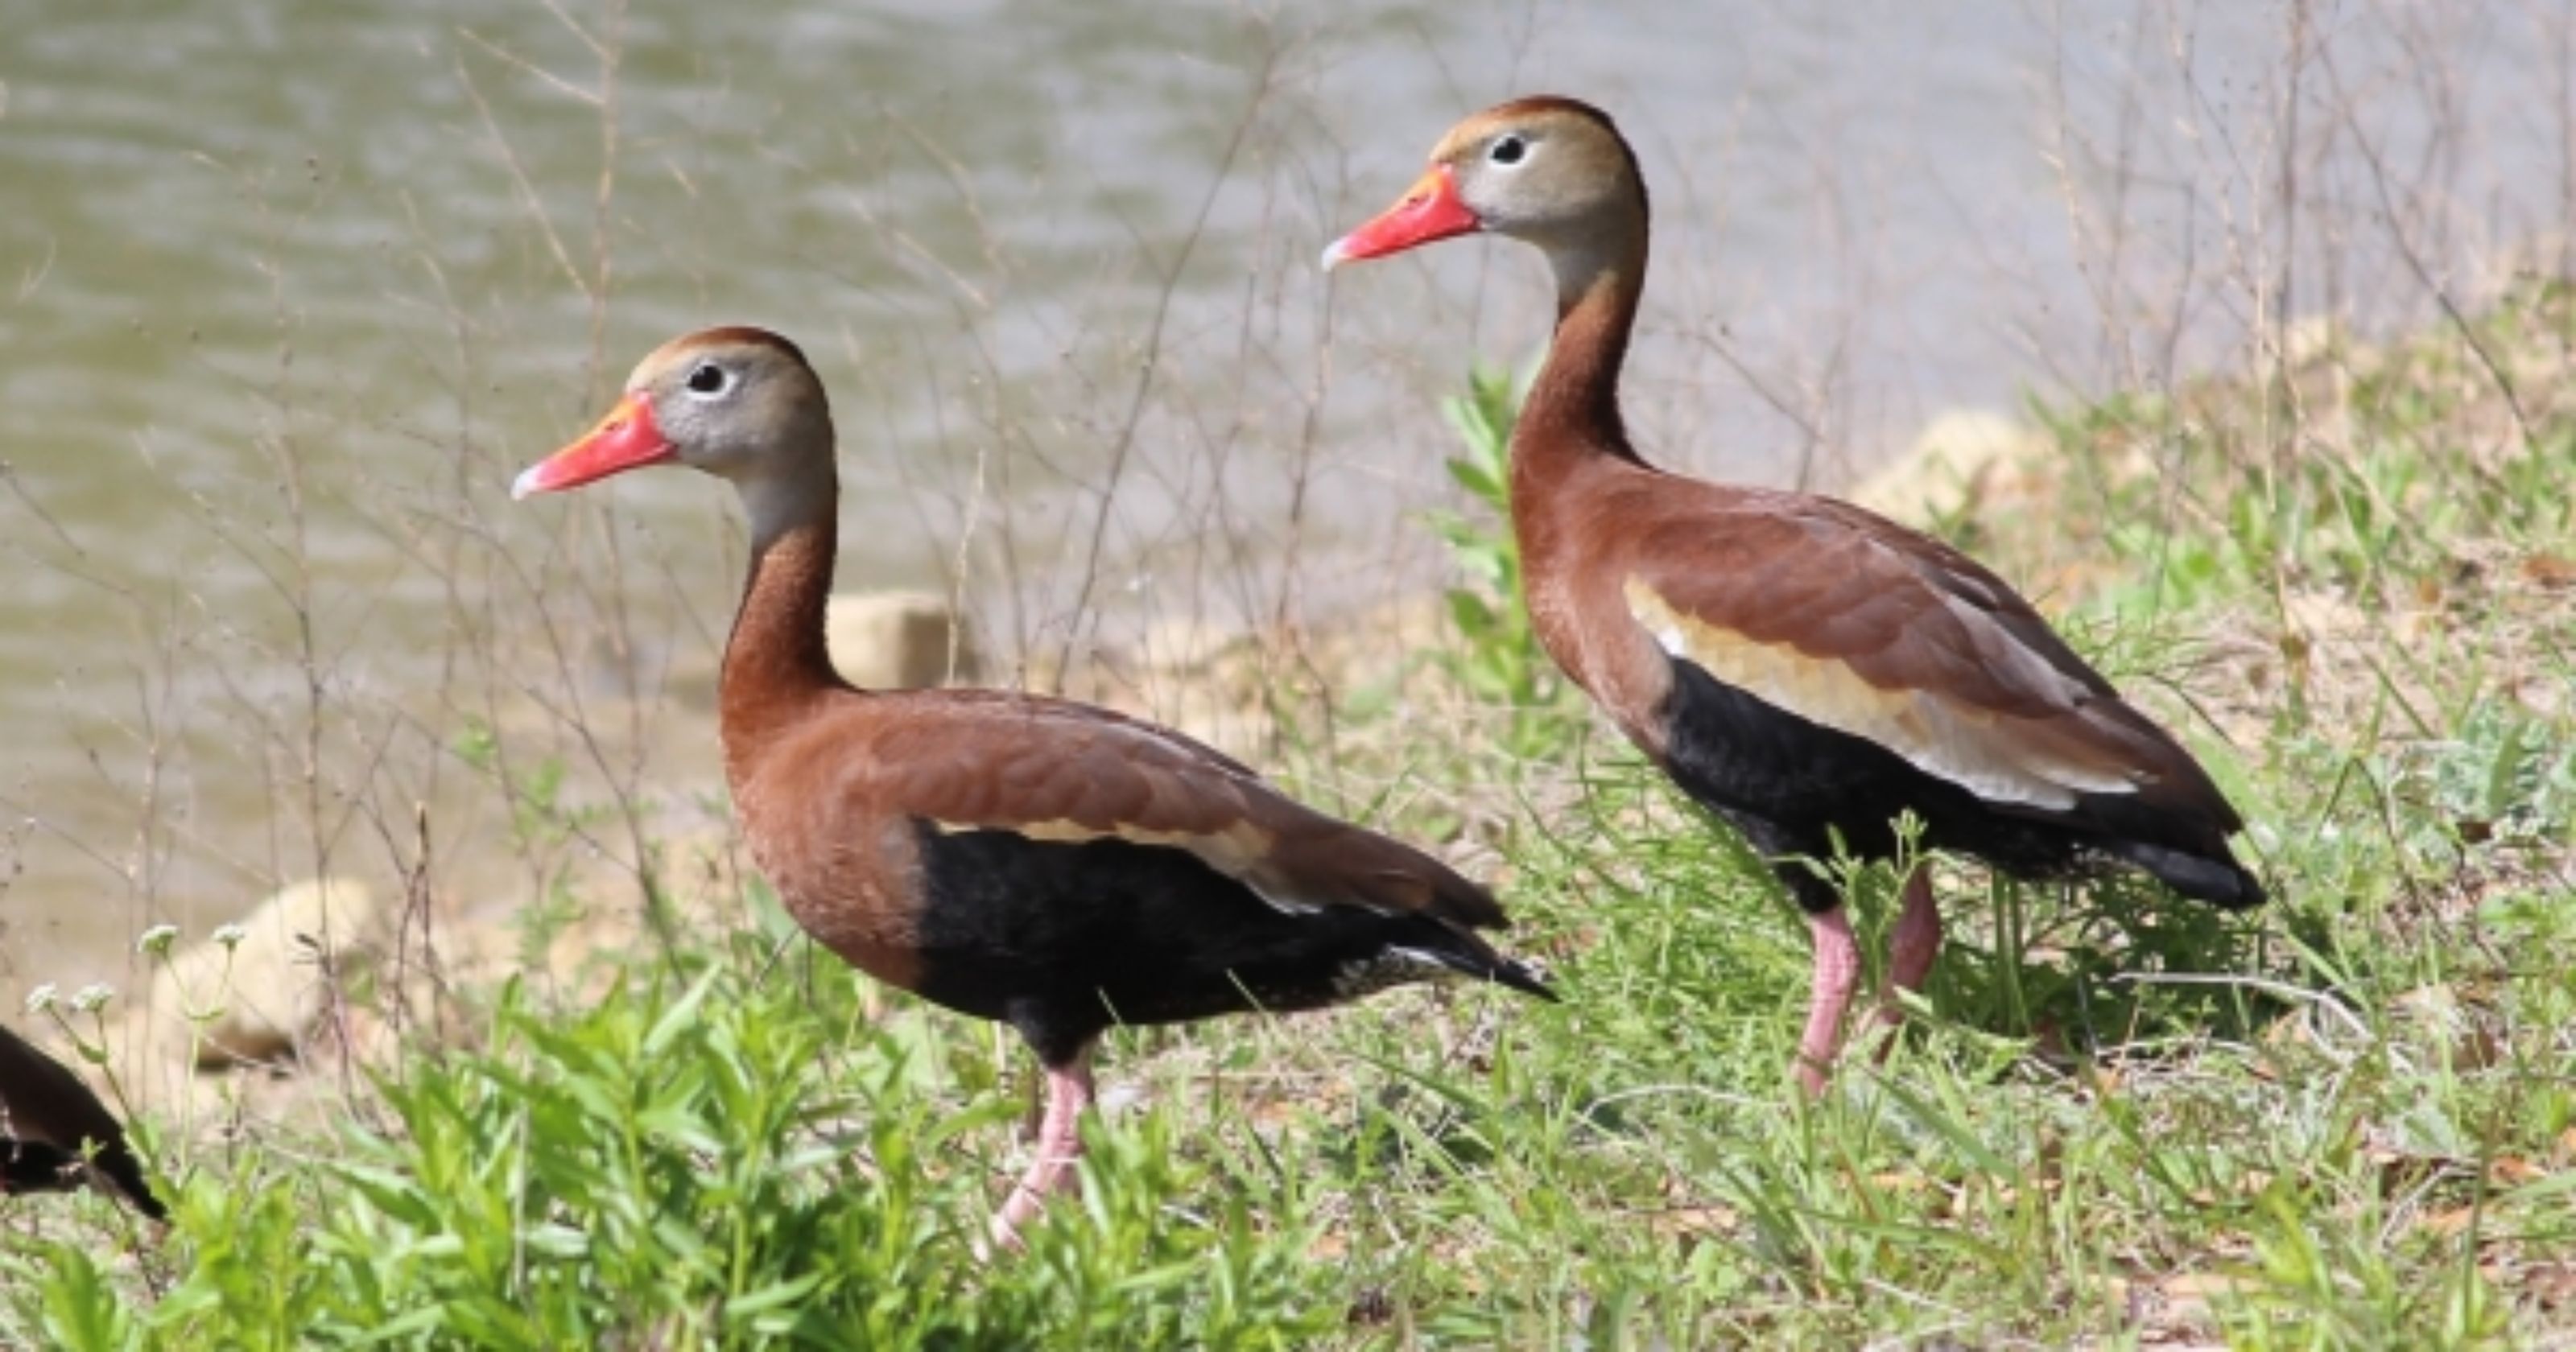 Black-bellied whistling duck may be expanding its range in Texas